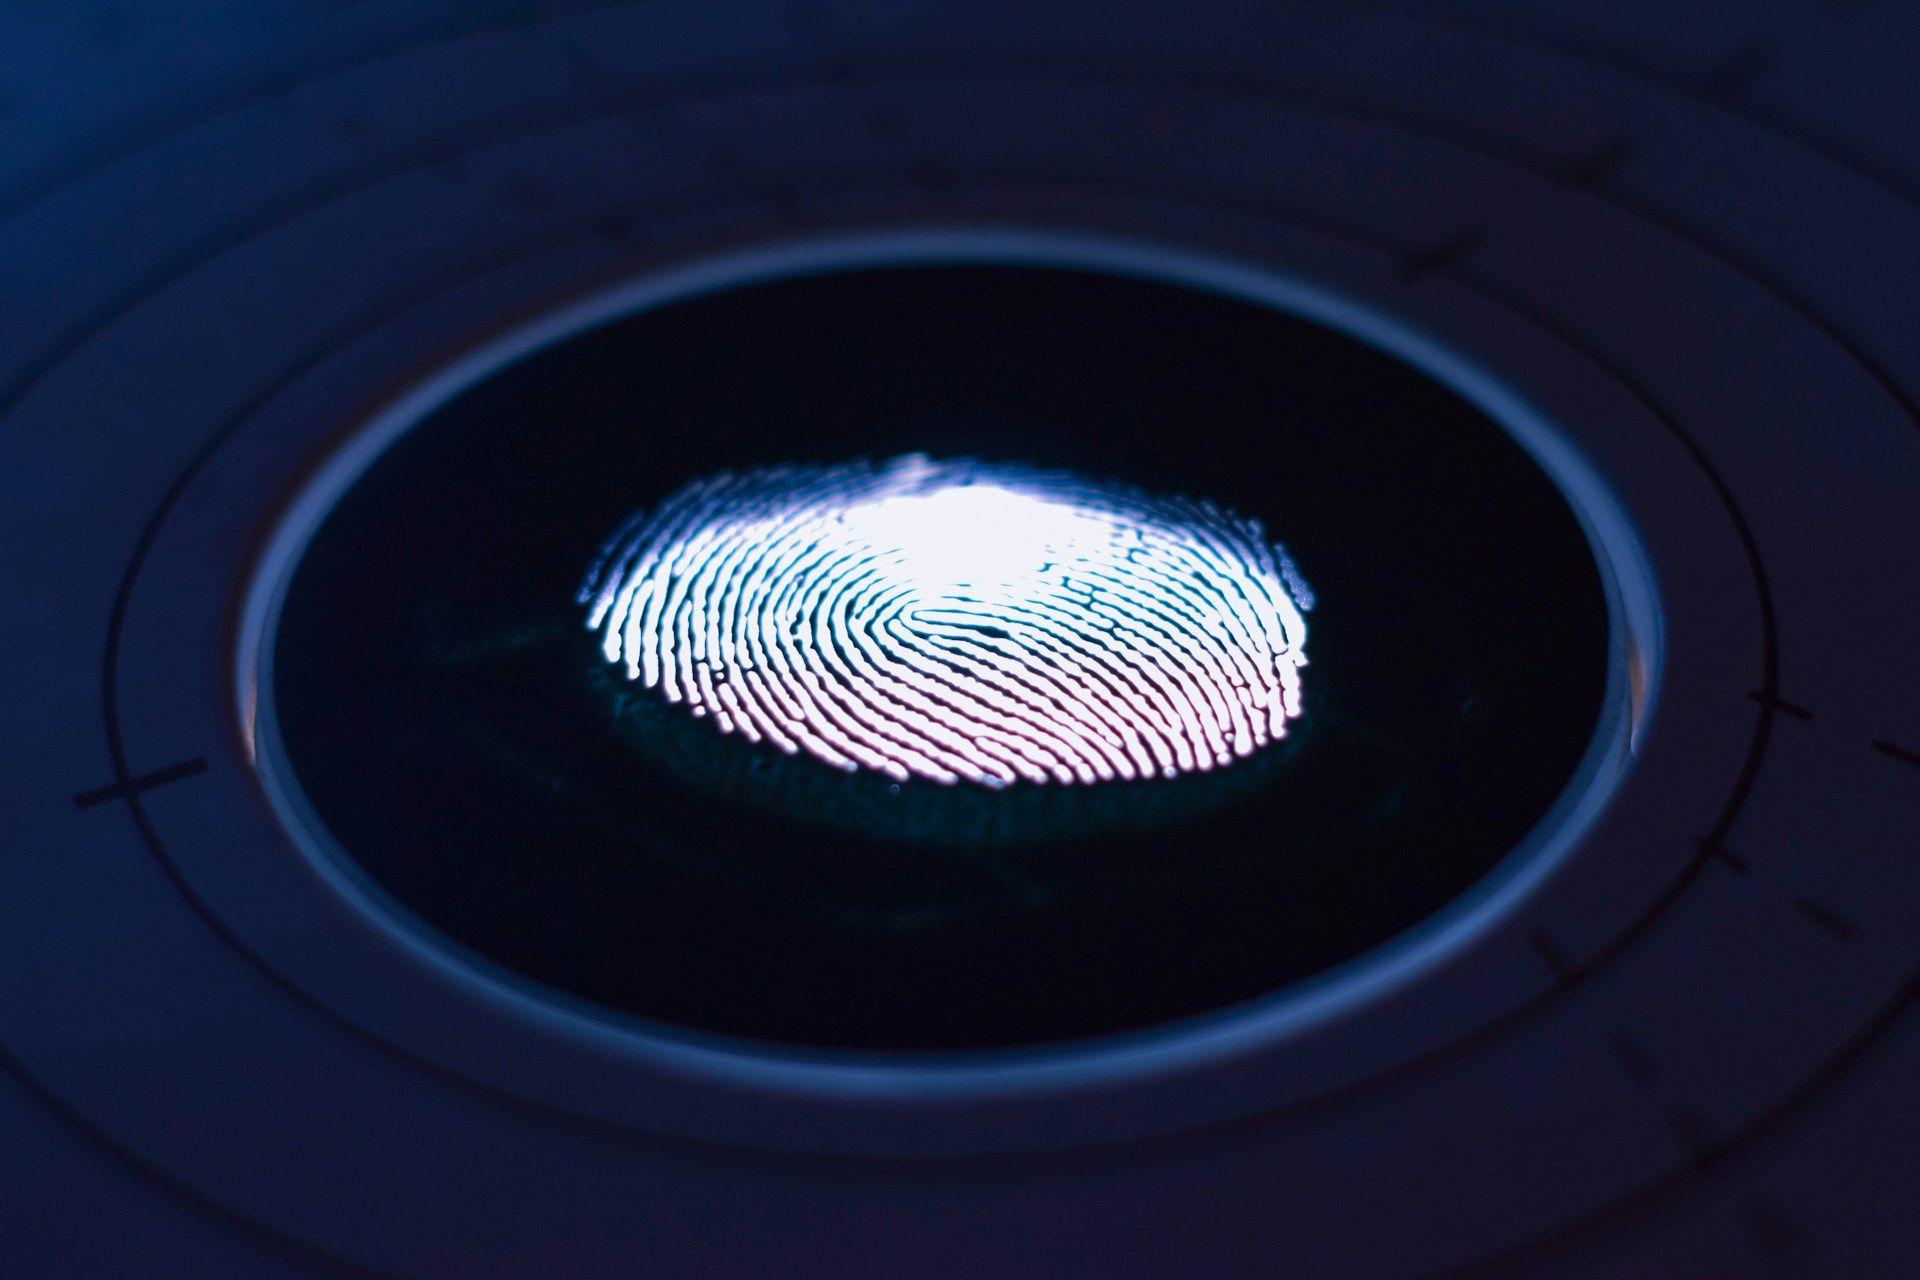  A glowing fingerprint pattern illuminated on a biometric sensor with concentric circles and calibration markings around it.